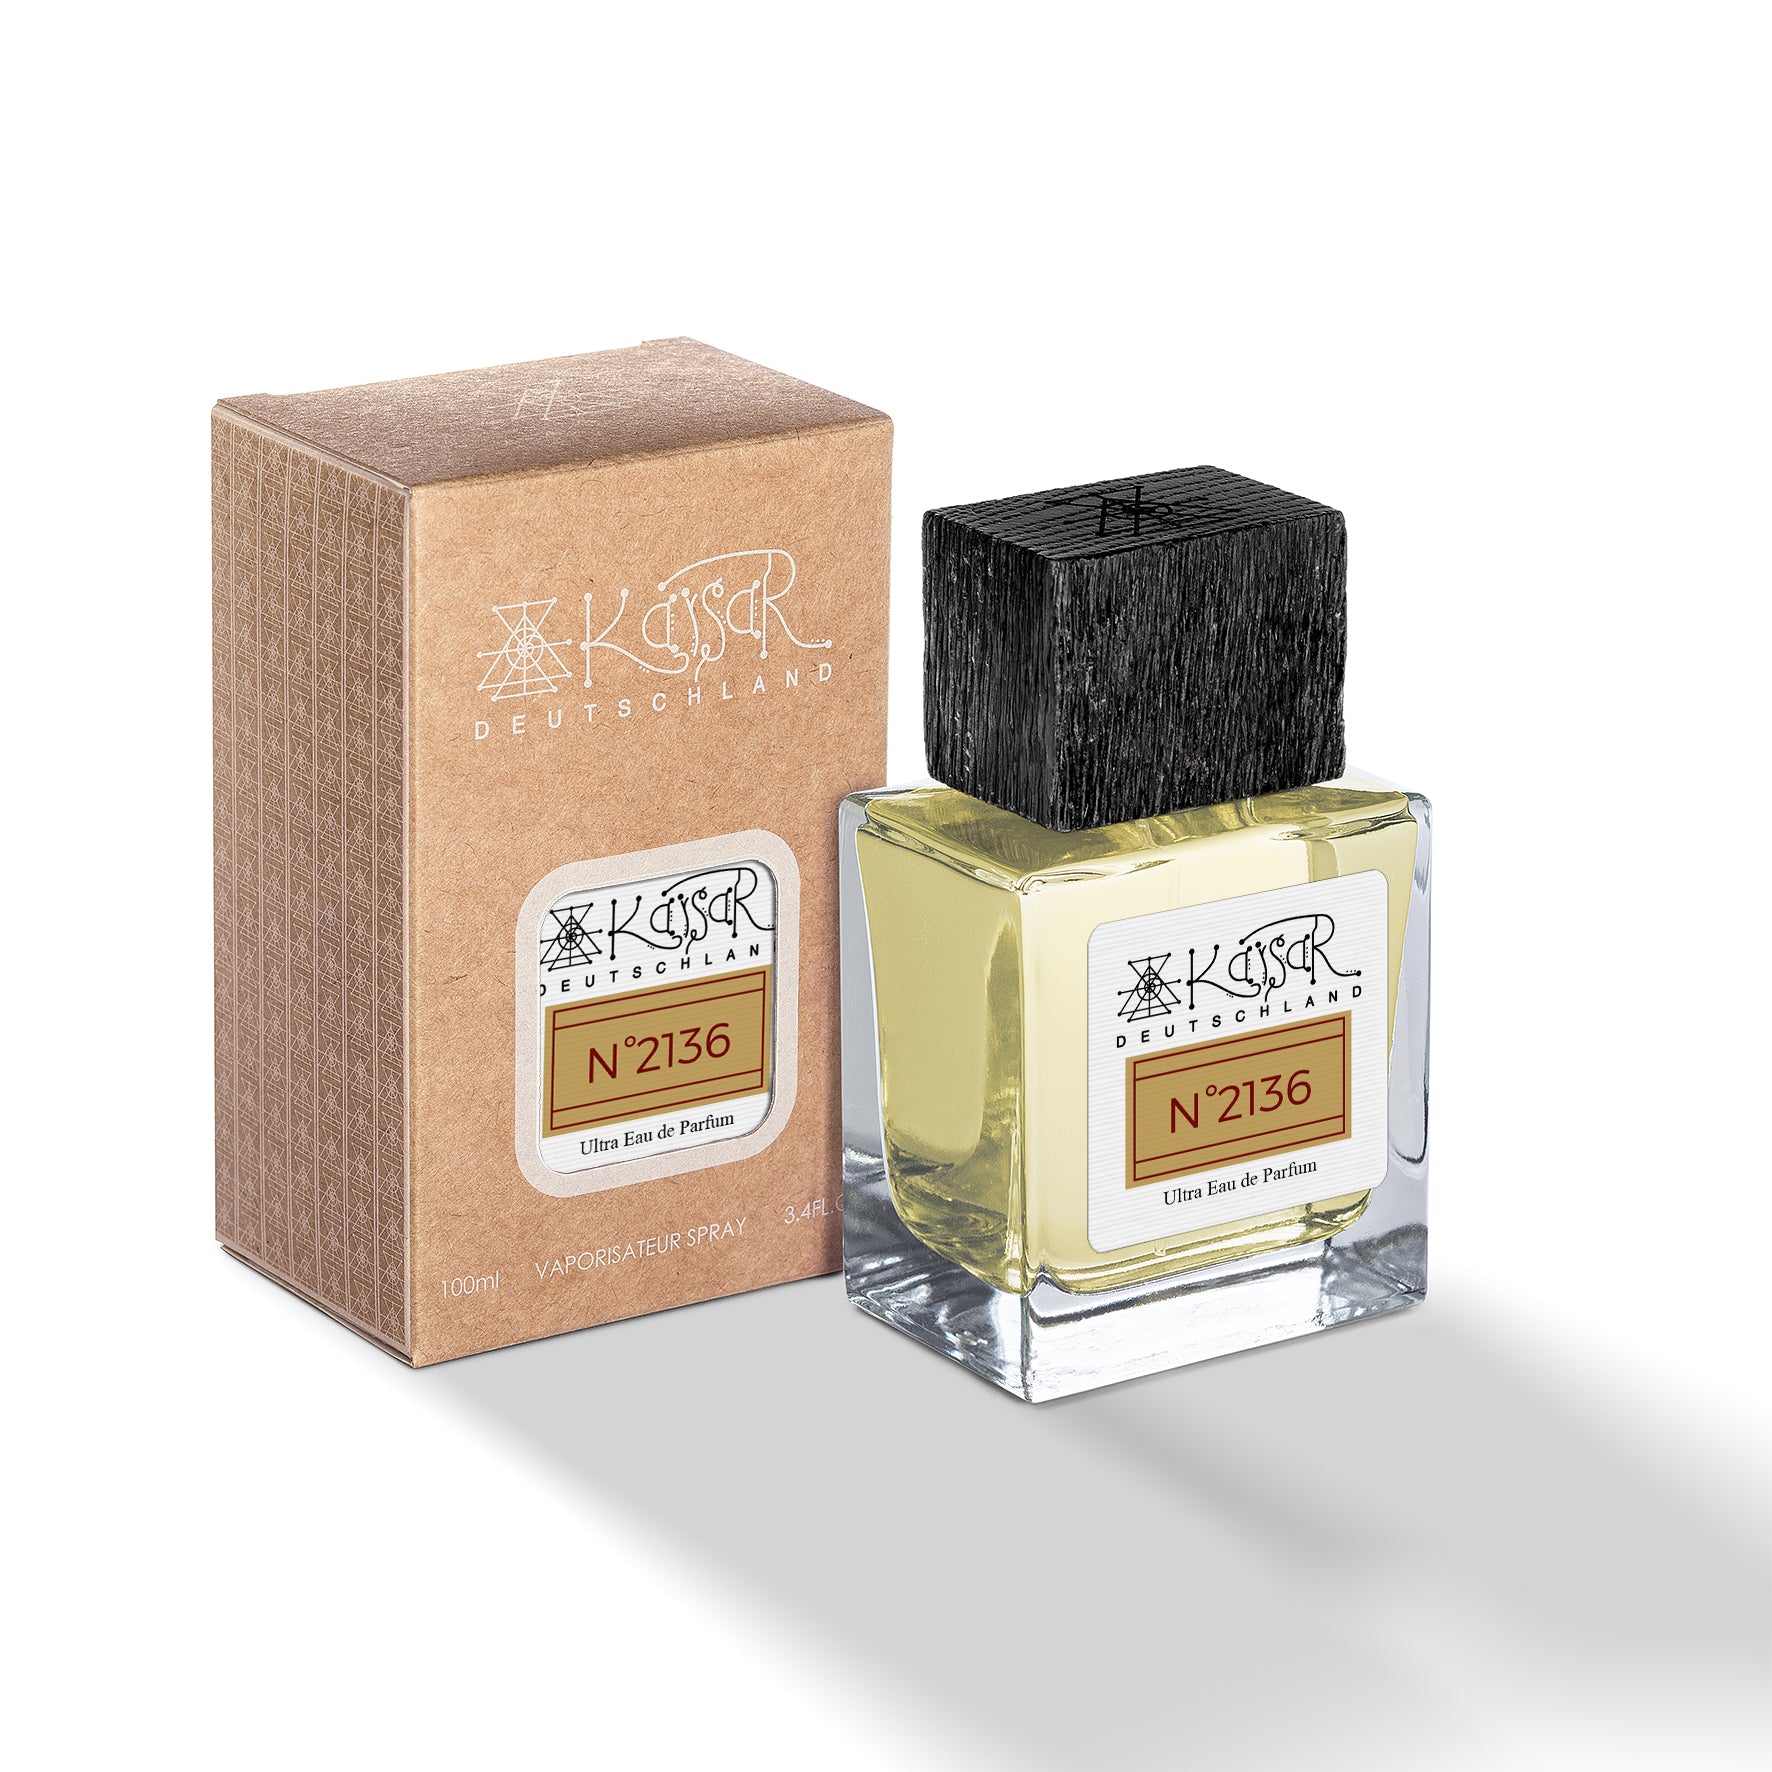 N°2136 Amber Oud Scent